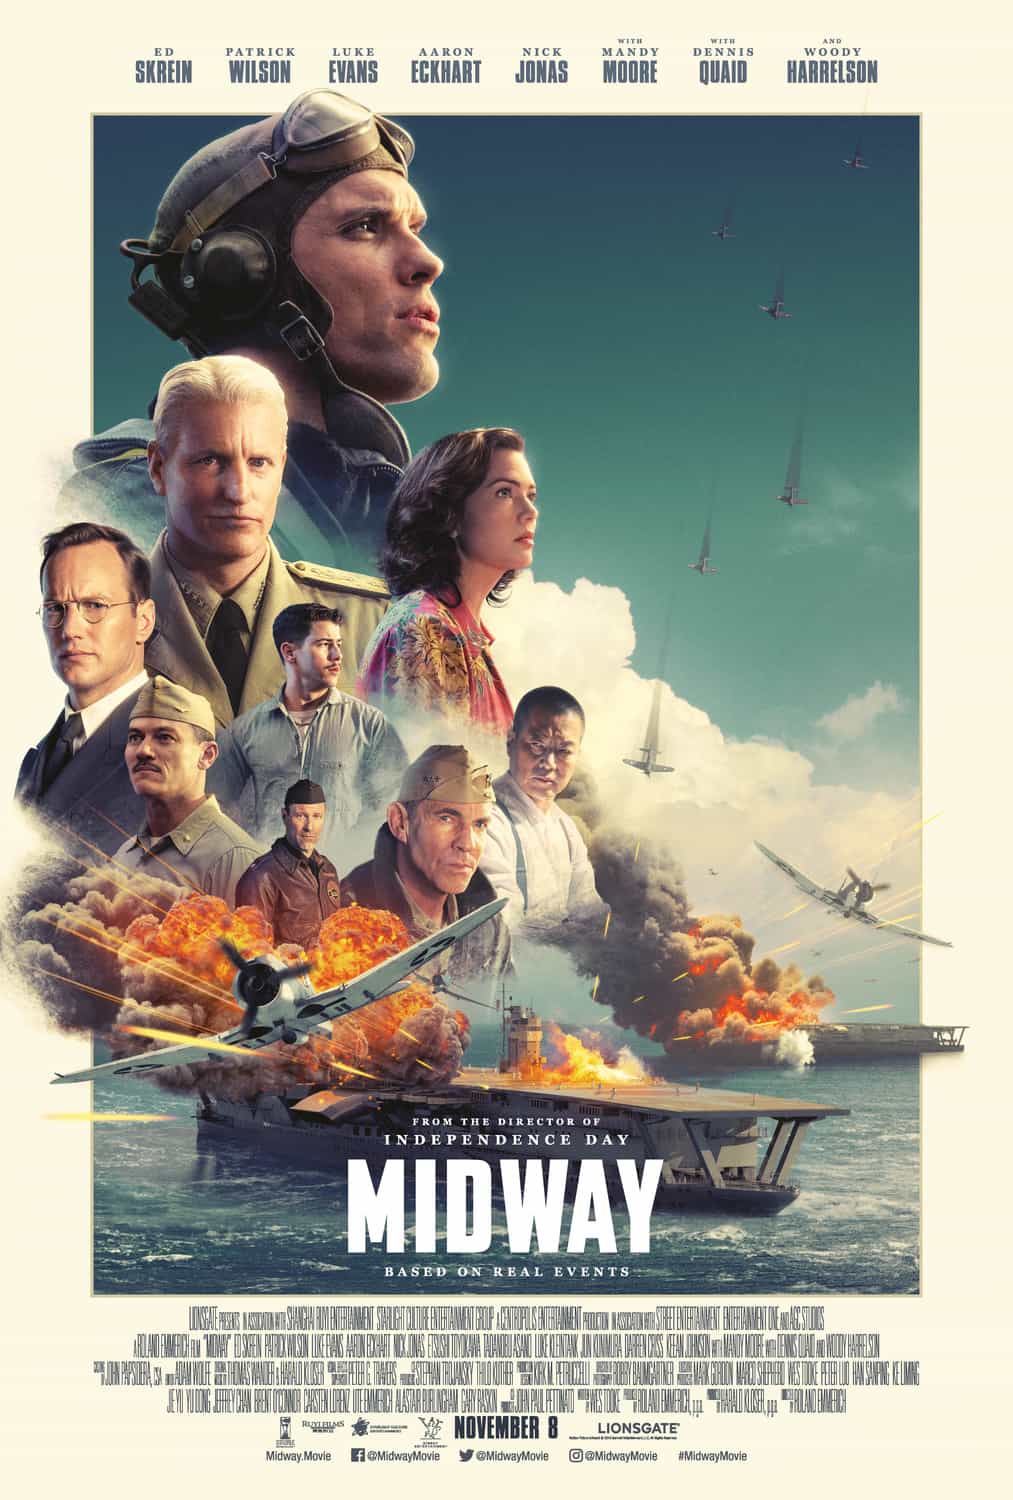 Midway is given a 12A age rating in the UK for moderate violence, threat, bloody images, infrequent strong language